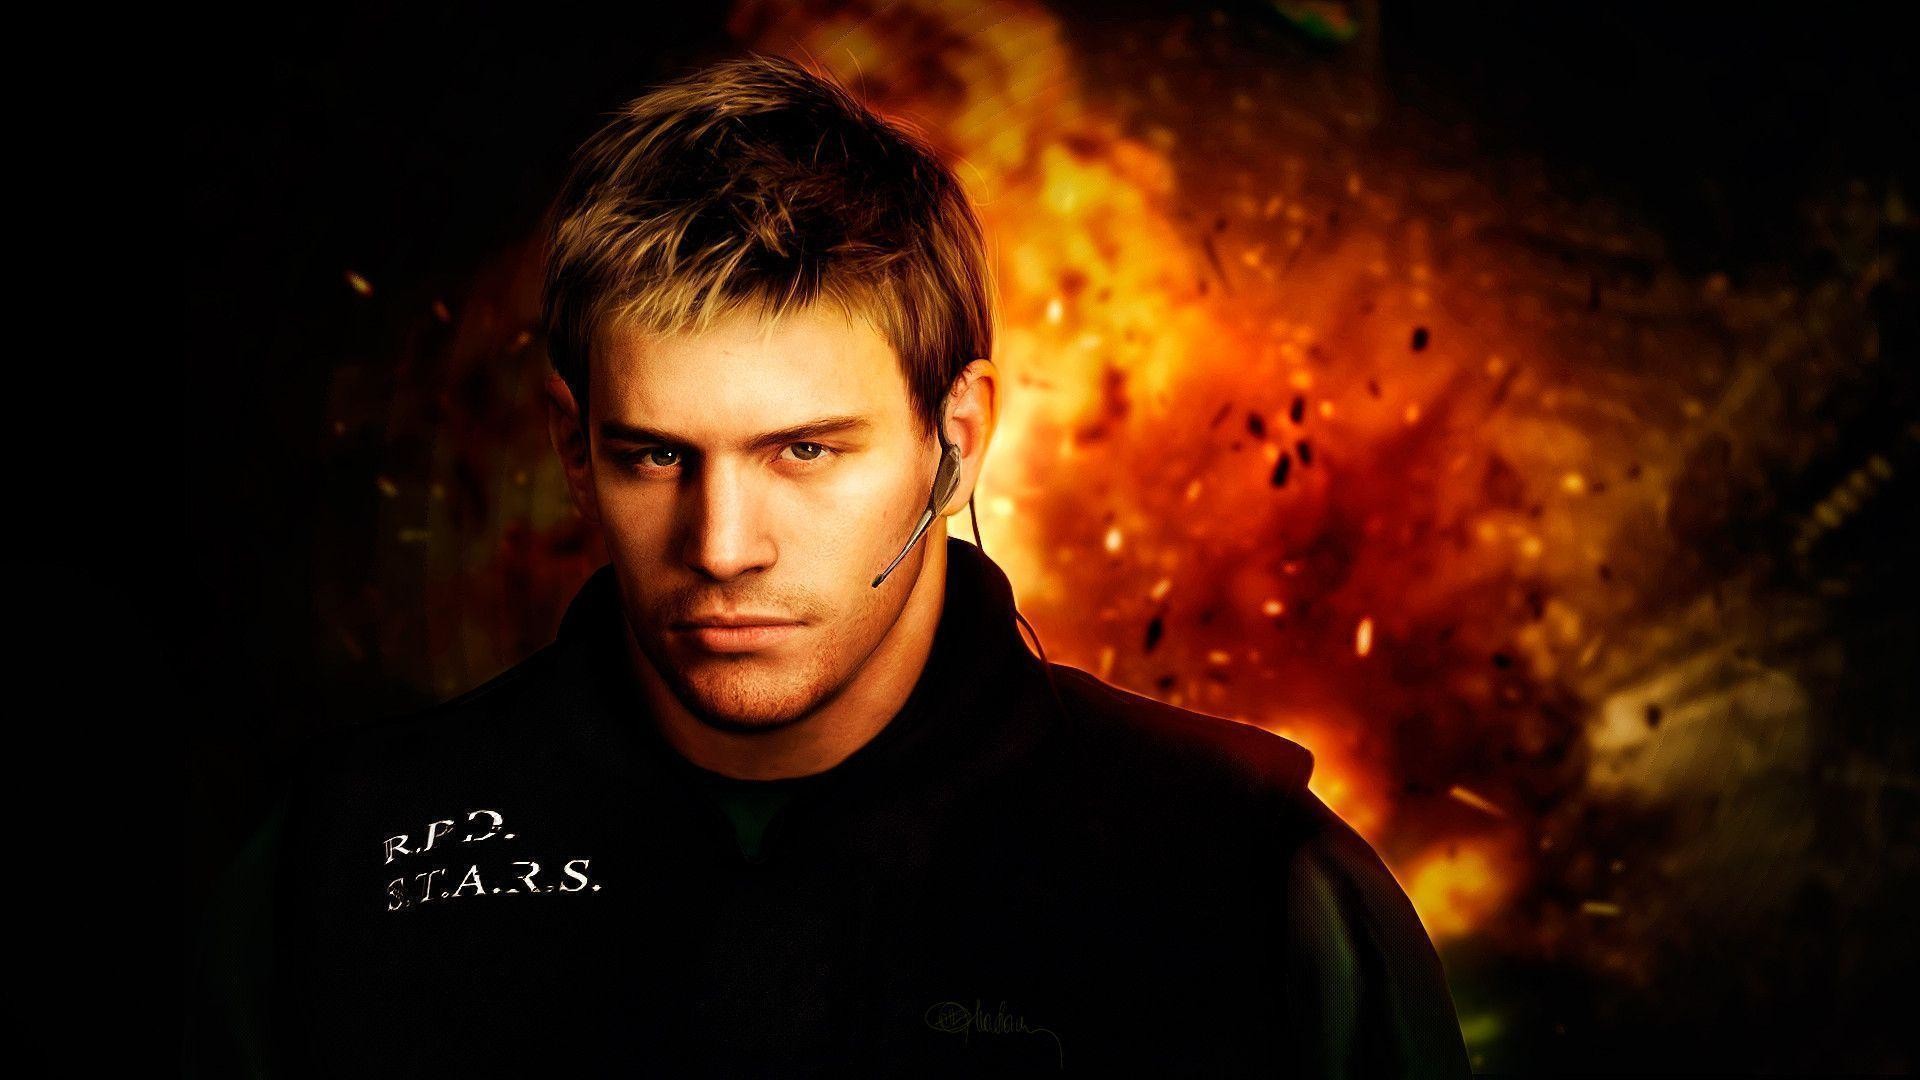 1920x1080 Photorealistic Chris Redfield Resident Evil 5 By Push Pulse On ..